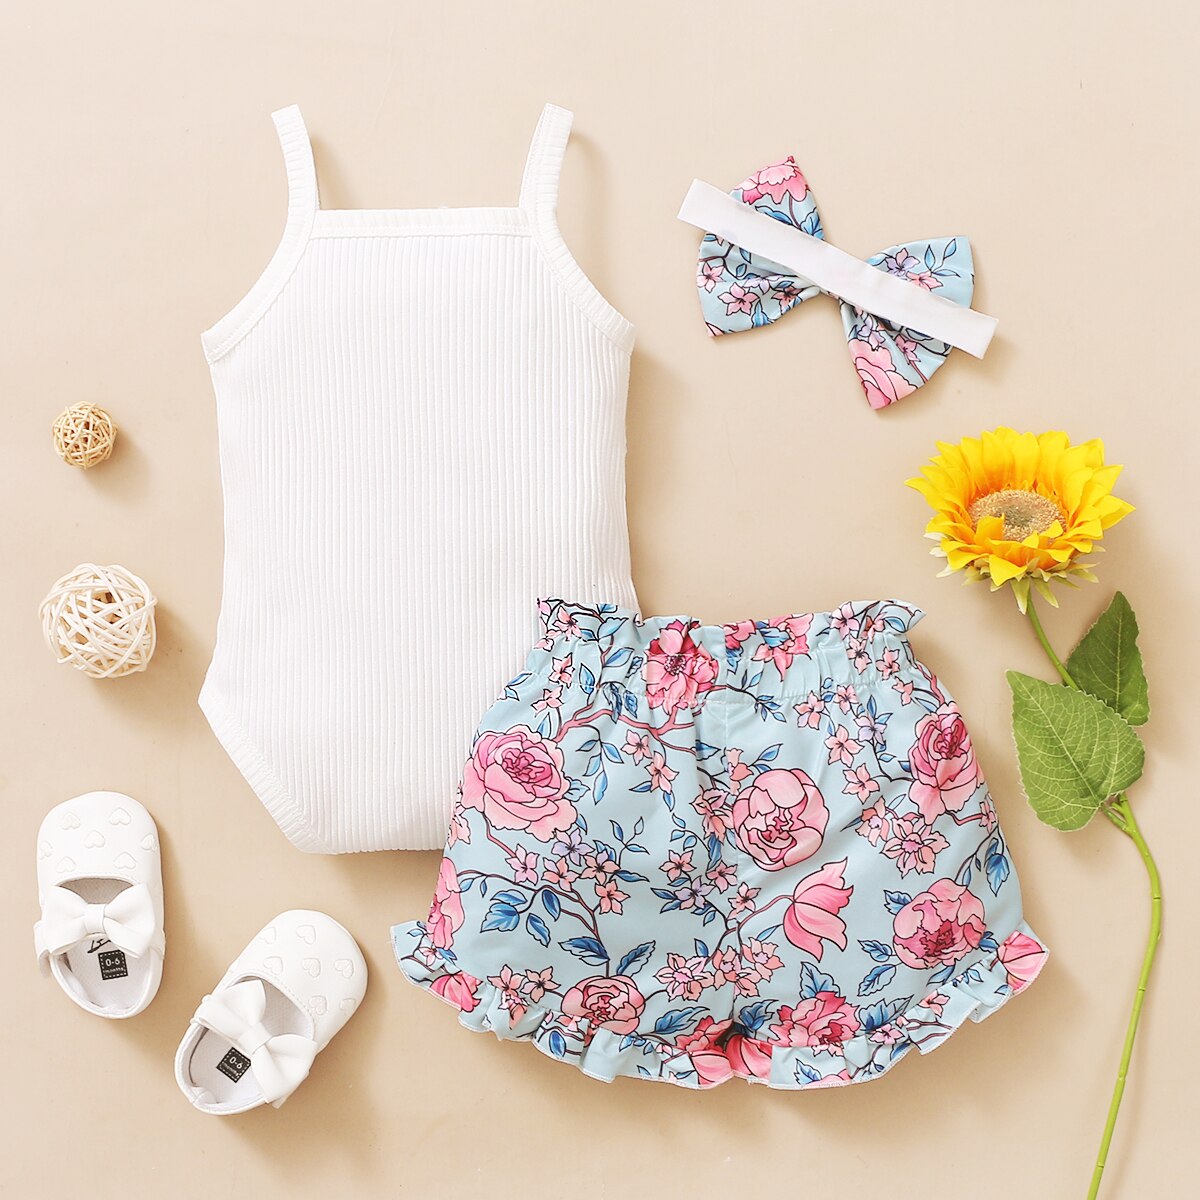 Baby-girl-this-cloth-lace-halter-dress-flower-print-shorts-suit-5